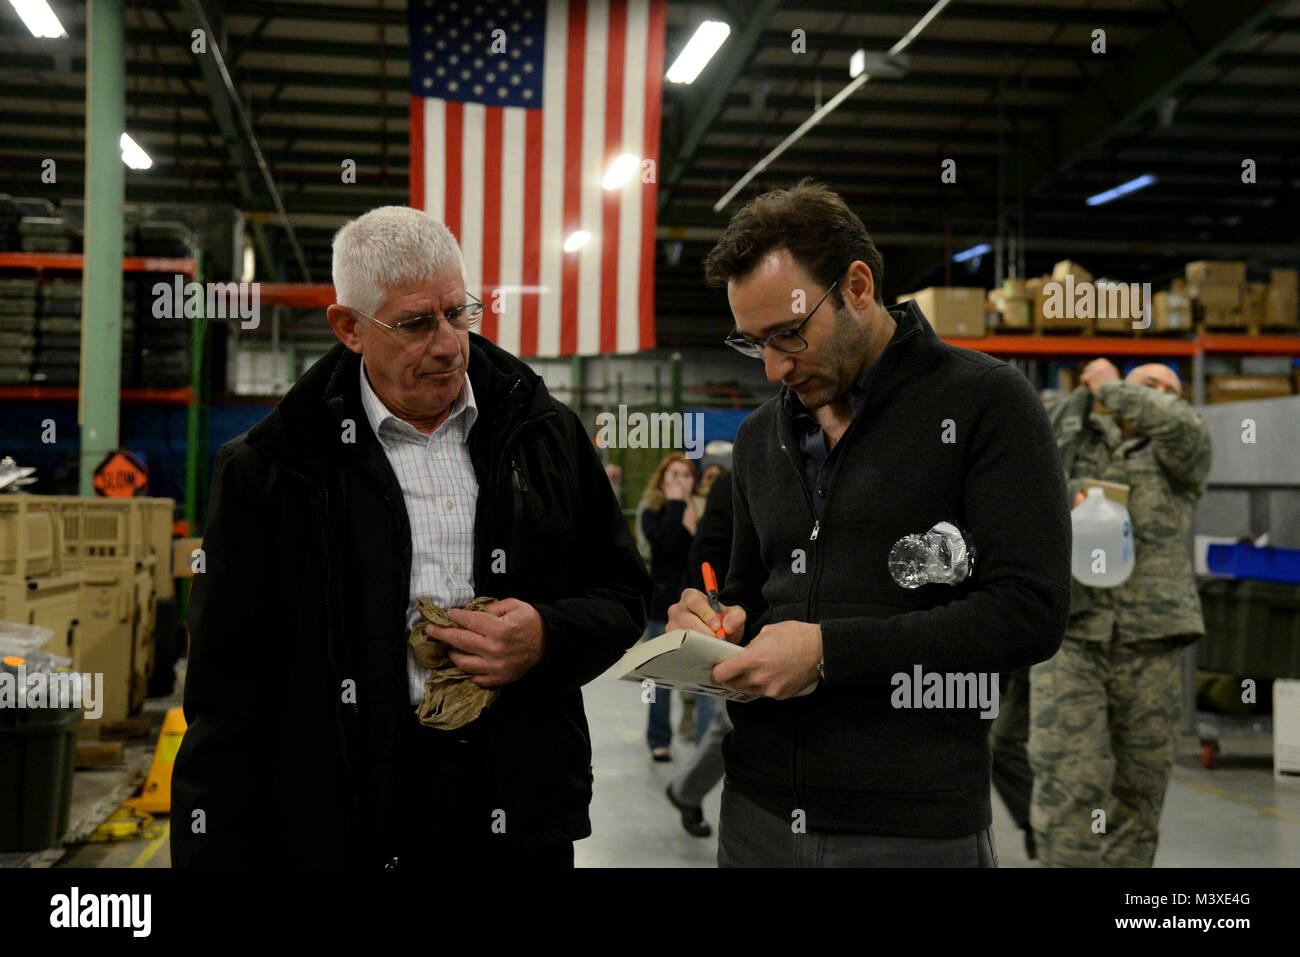 Simon Sinek signs a book for James Pacer, 436th Airlift Wing Transition Assistance Program manager, after a briefing with Team Dover customer service Airmen Feb. 1, 2018, at Dover Air Force Base, Del. Sinek explained the significance of good leadership and how it relates to the customer service experience. (U.S. Air Force photo by Staff Sgt. Aaron J. Jenne) Stock Photo